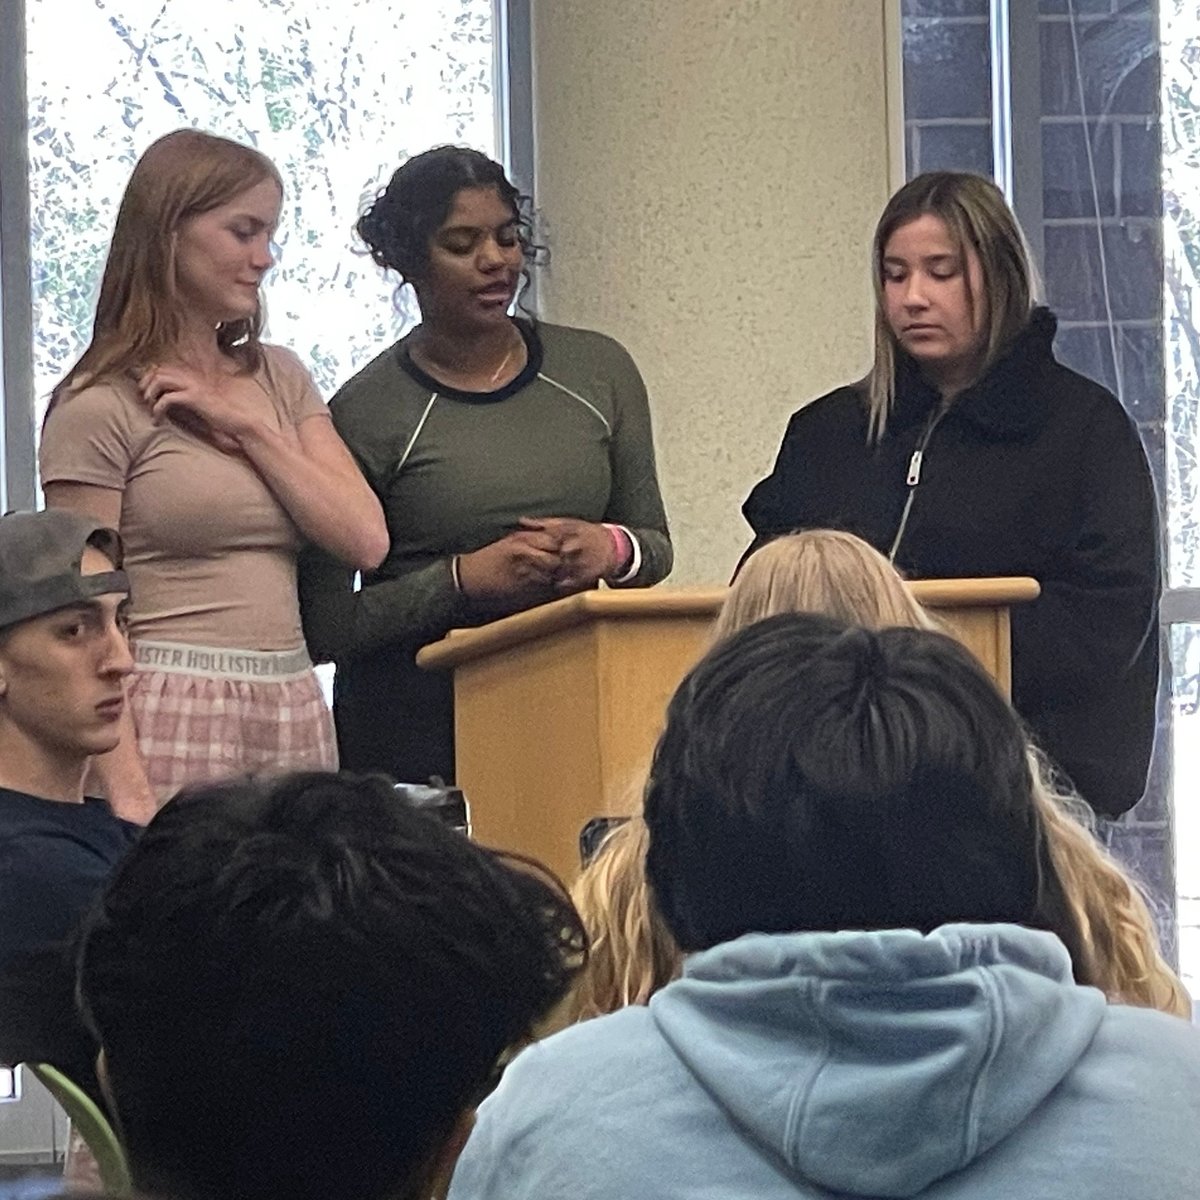 Finance students participated in the WHS version of Shark Tank when they pitched a product complete with elevator pitches. Provided with feedback, students cheered when our special guest offered to buy stock in their companies! #portraitofagraduate  @UCPSNC  @AGHoulihan